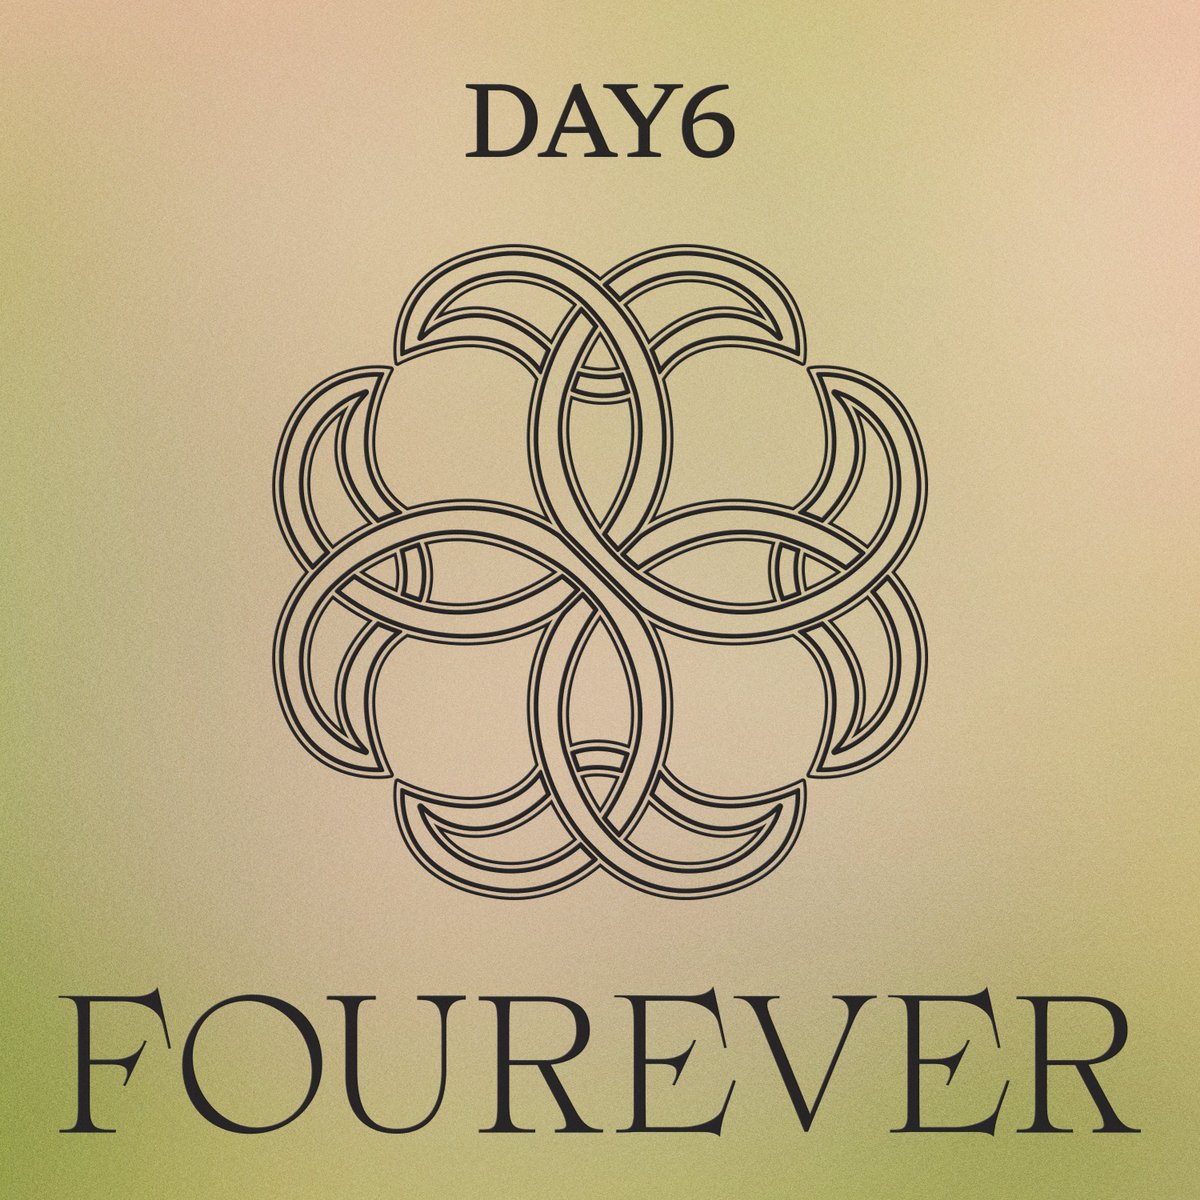 DAY6 8th Mini Album ＜Fourever＞ Now available globally! day6.lnk.to/fourever #DAY6 #데이식스 #Fourever #Welcome_to_the_Show